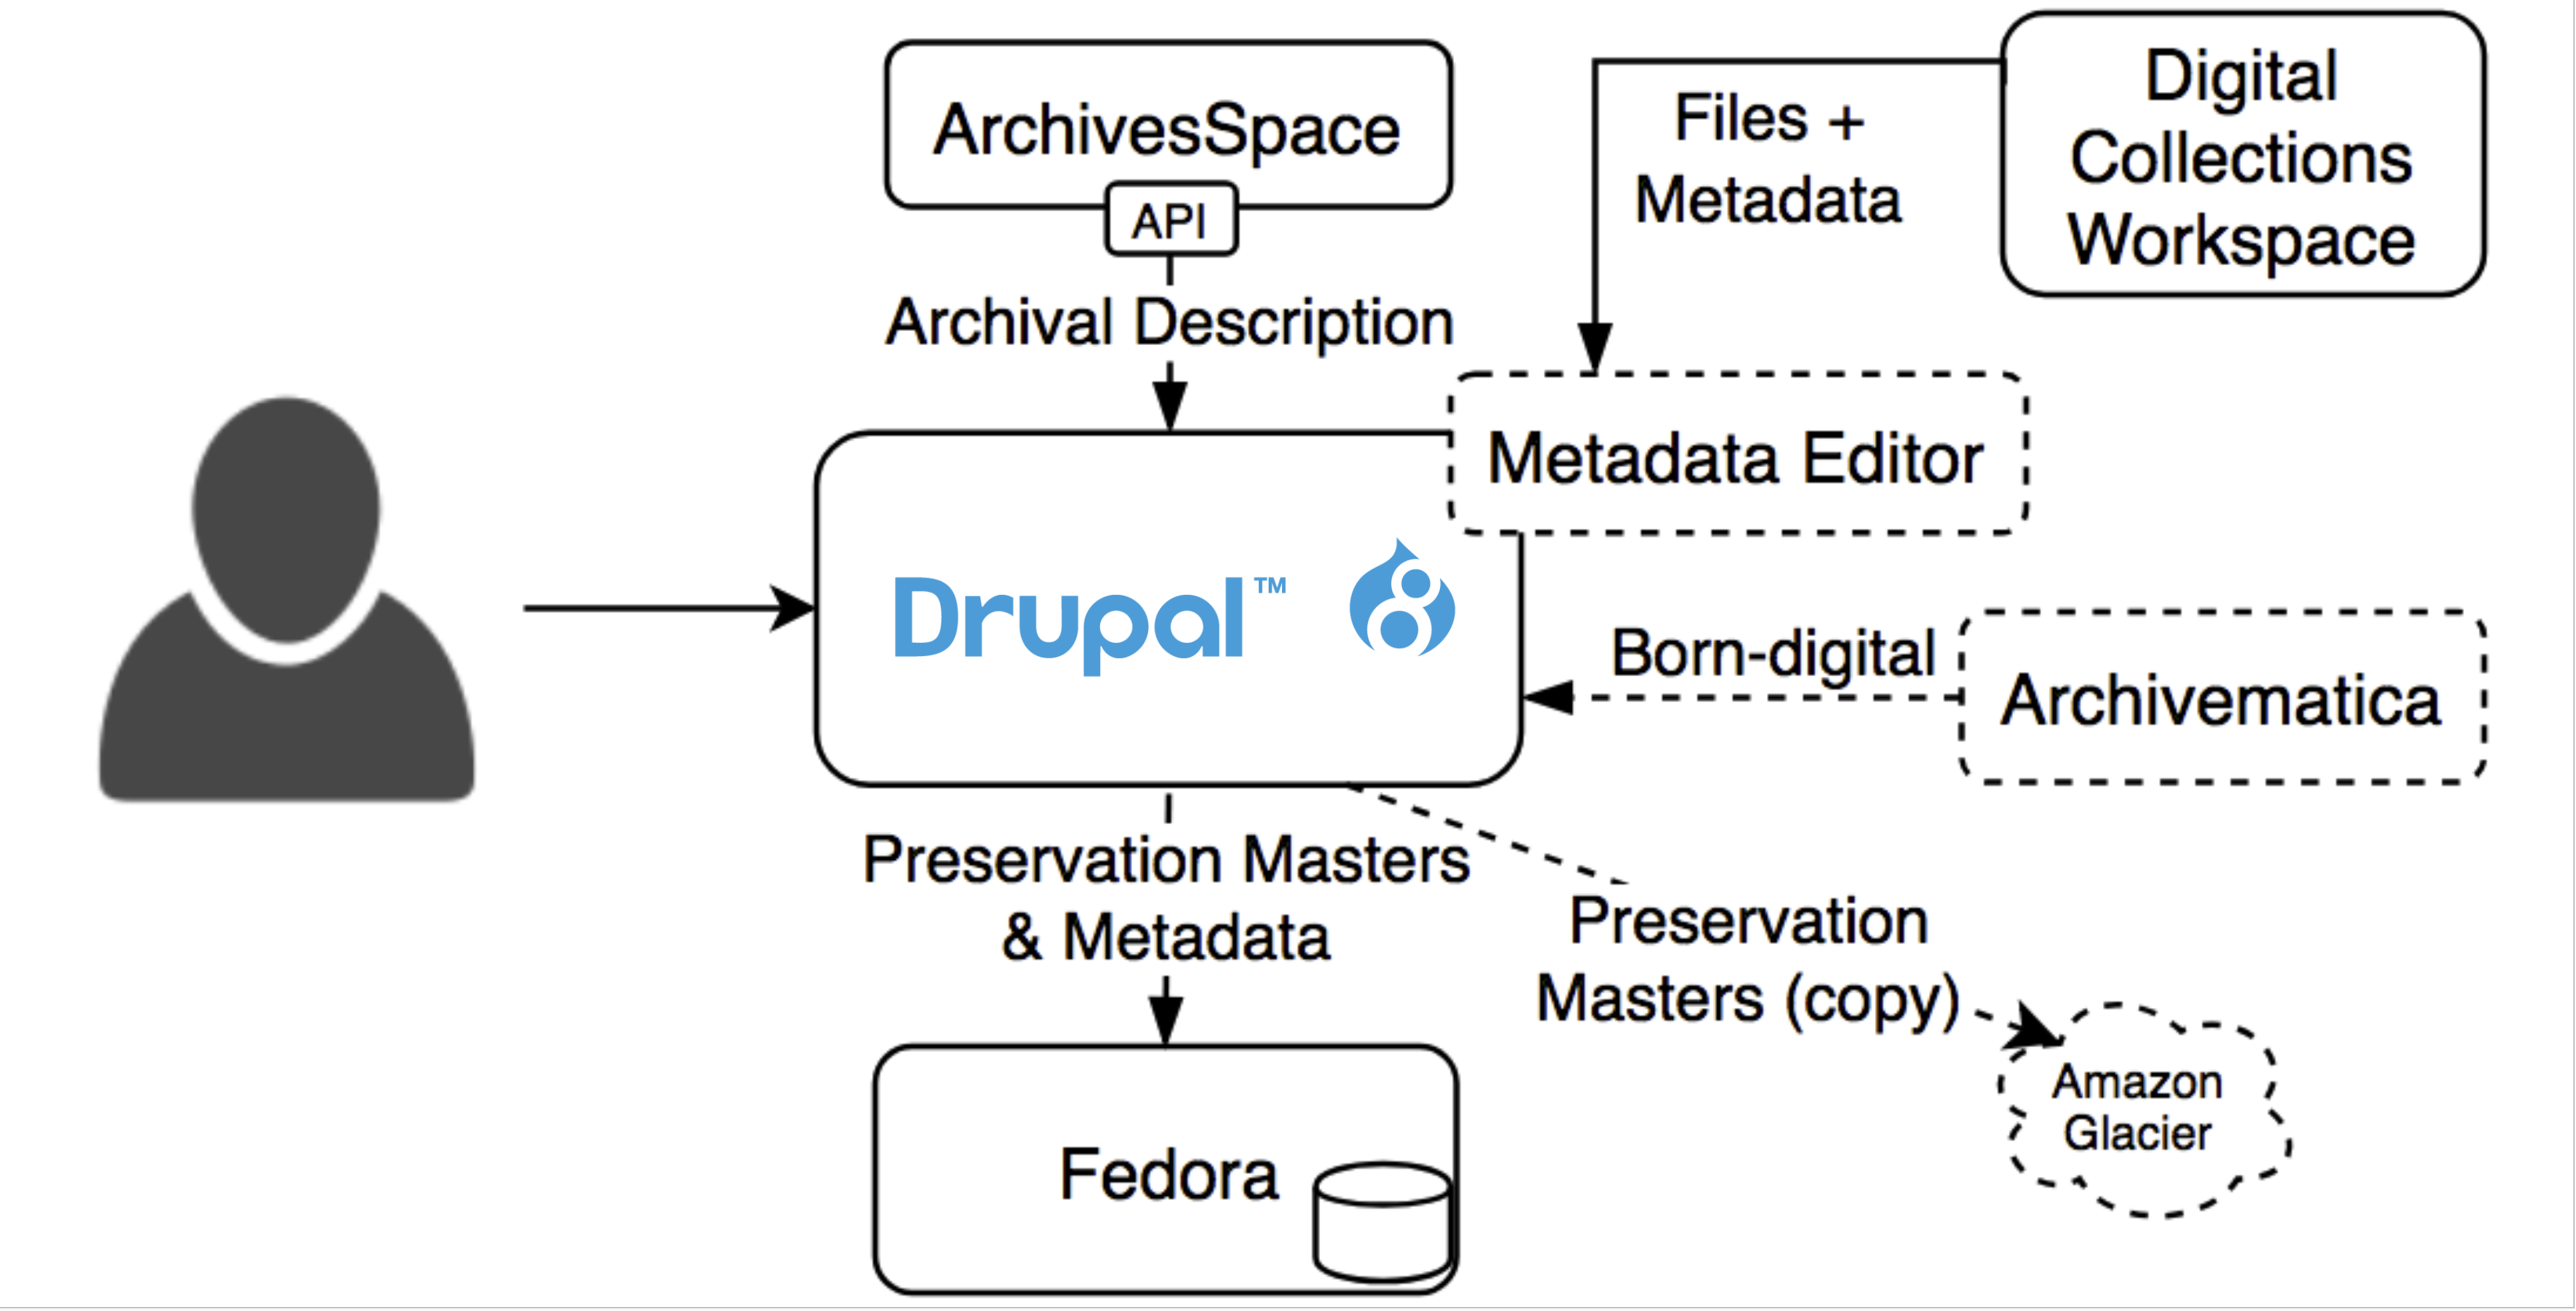 Planned architecture where Drupal now serves as the unified interface for Special Collections web content..